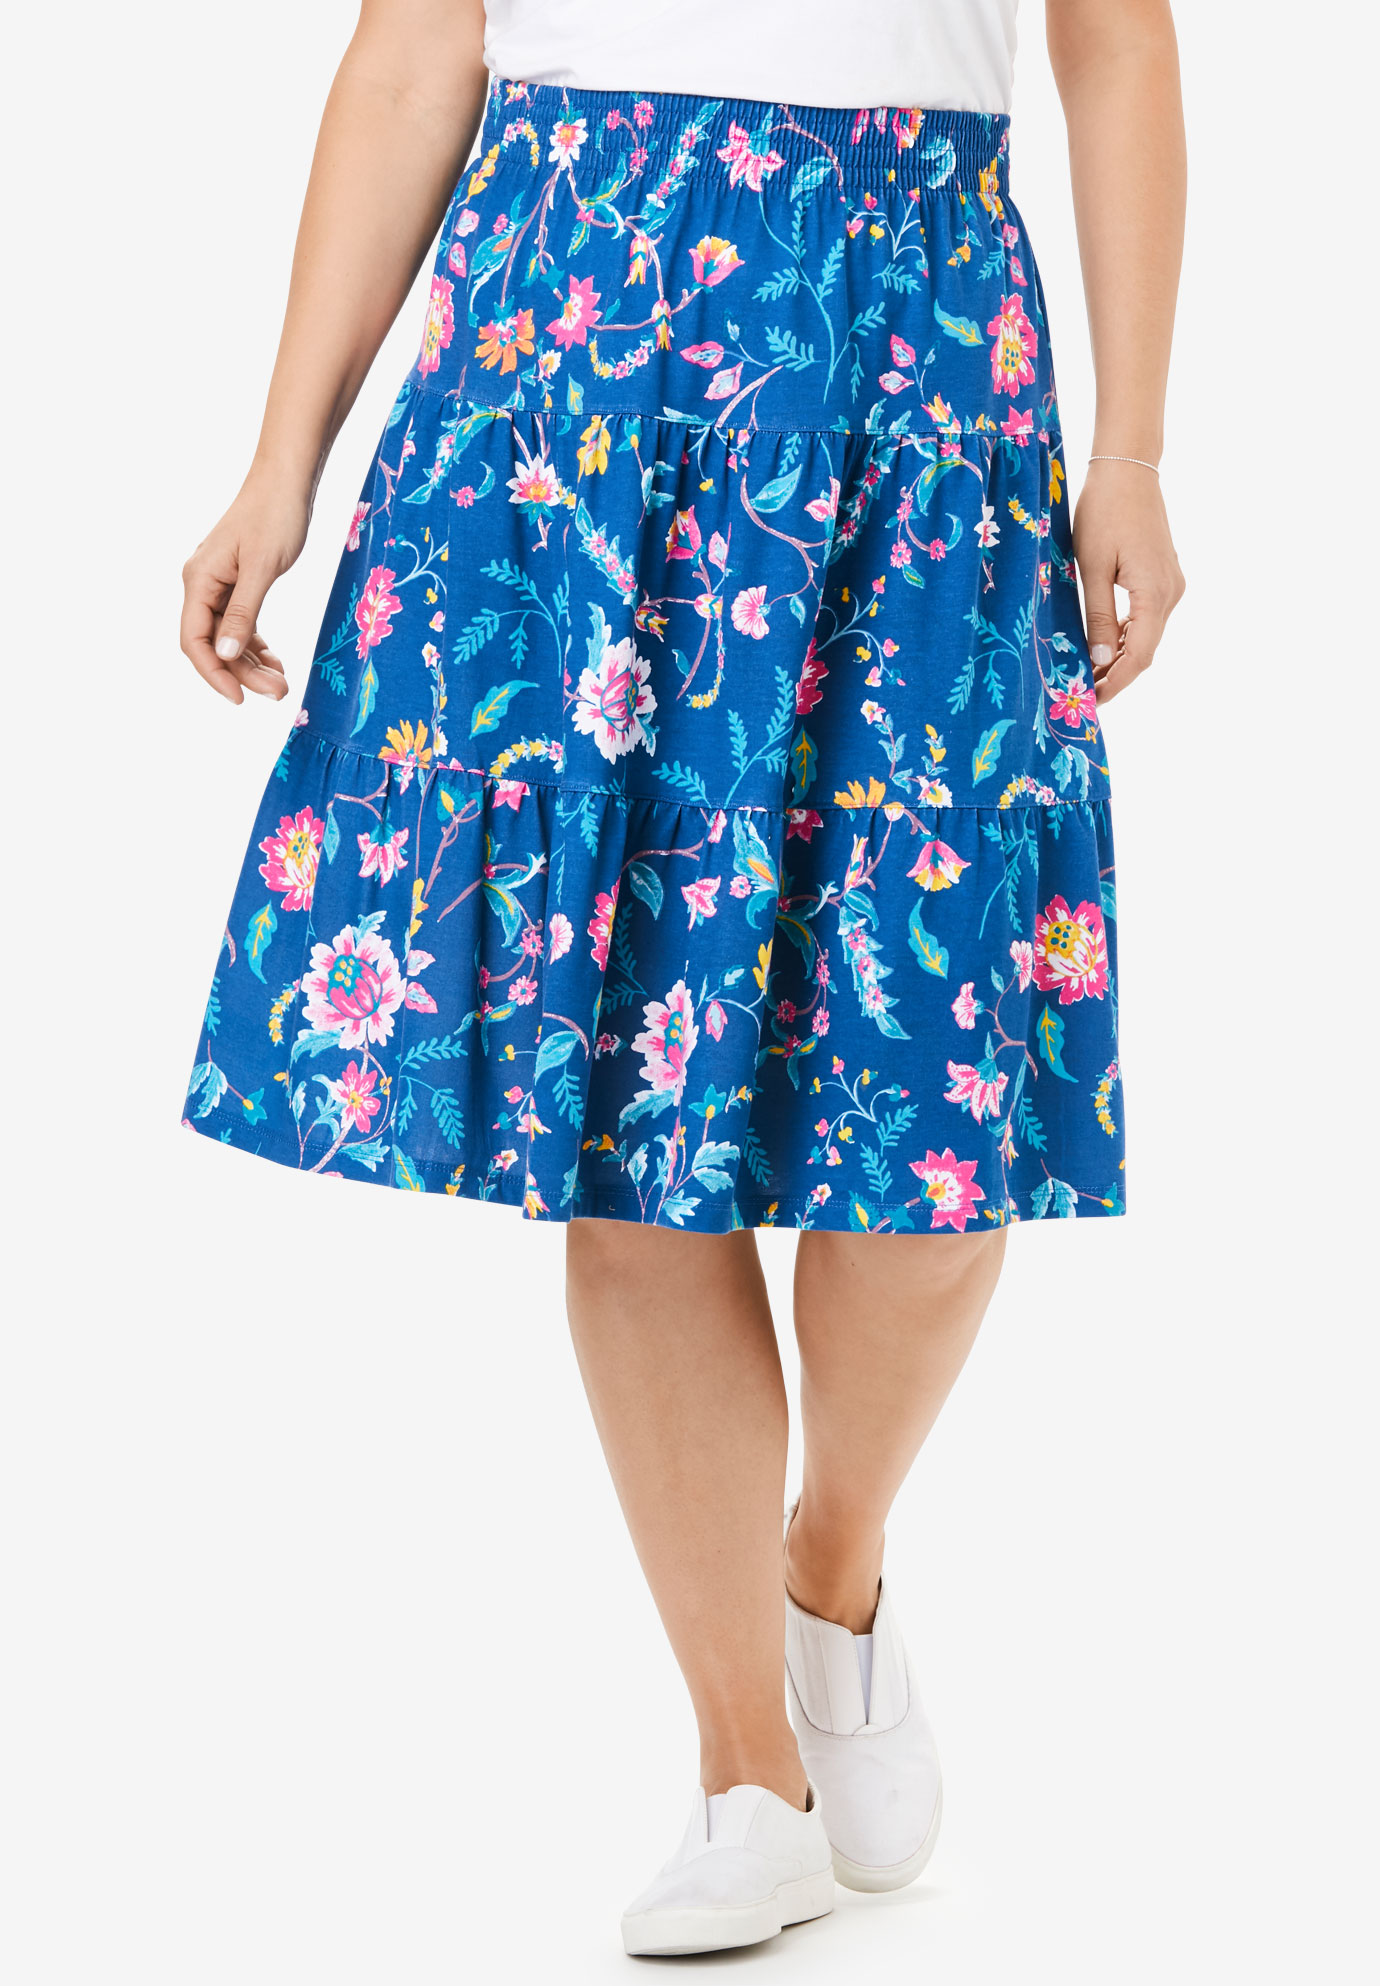 Jersey Knit Tiered Skirt| Plus Size Skirts | Woman Within